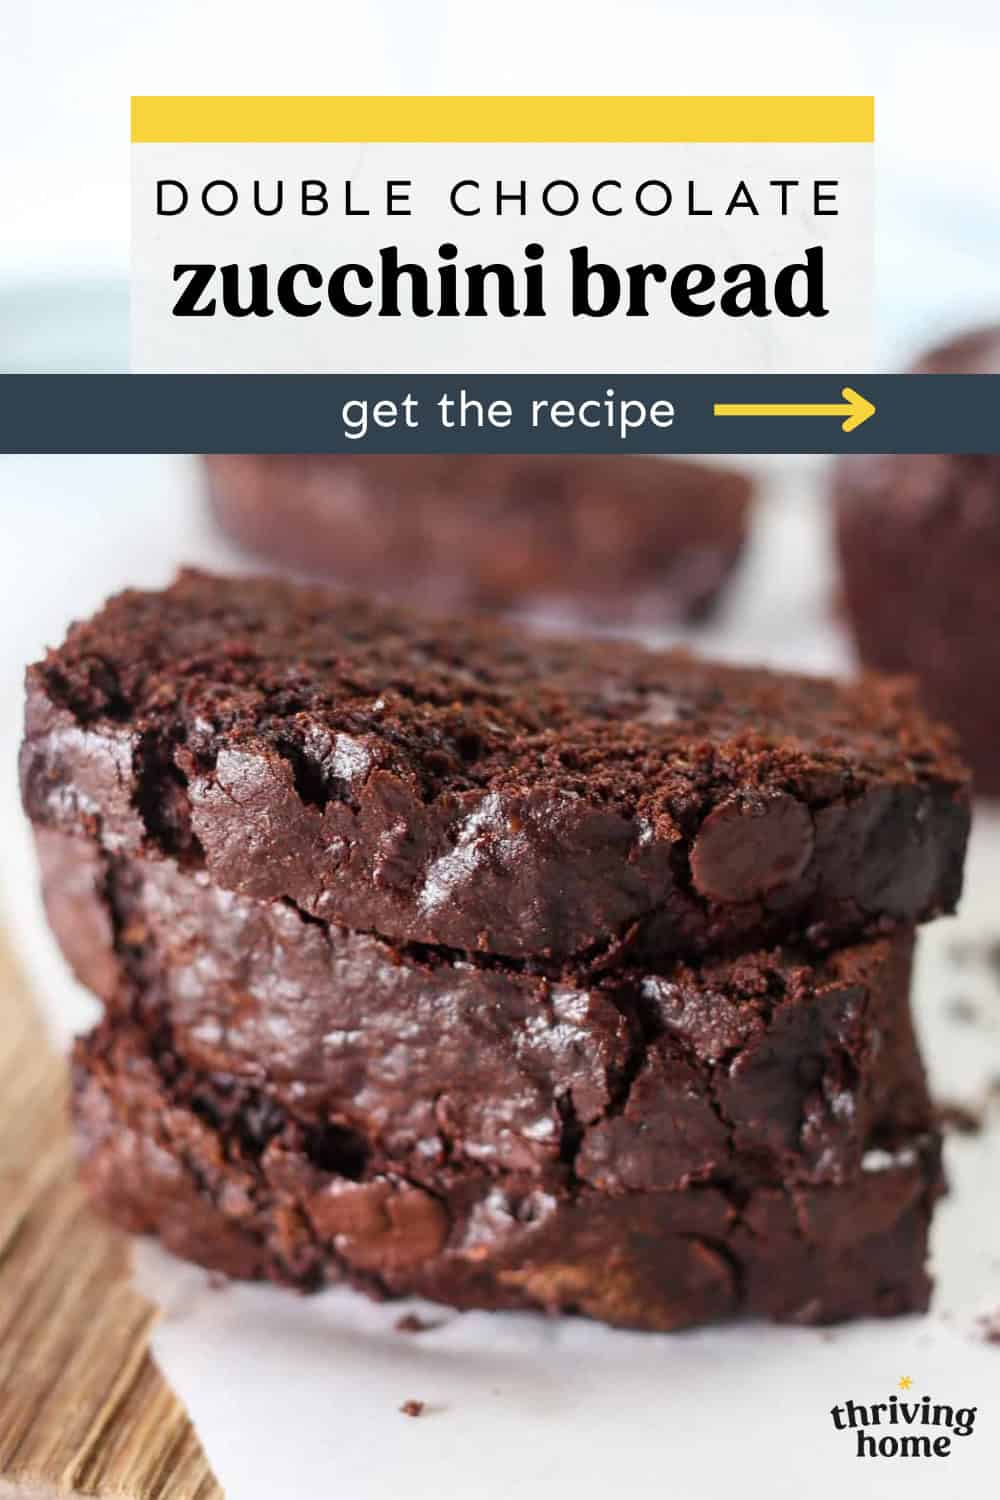 Three slices of double chocolate zucchini bread stacked up on a wooden cutting board.